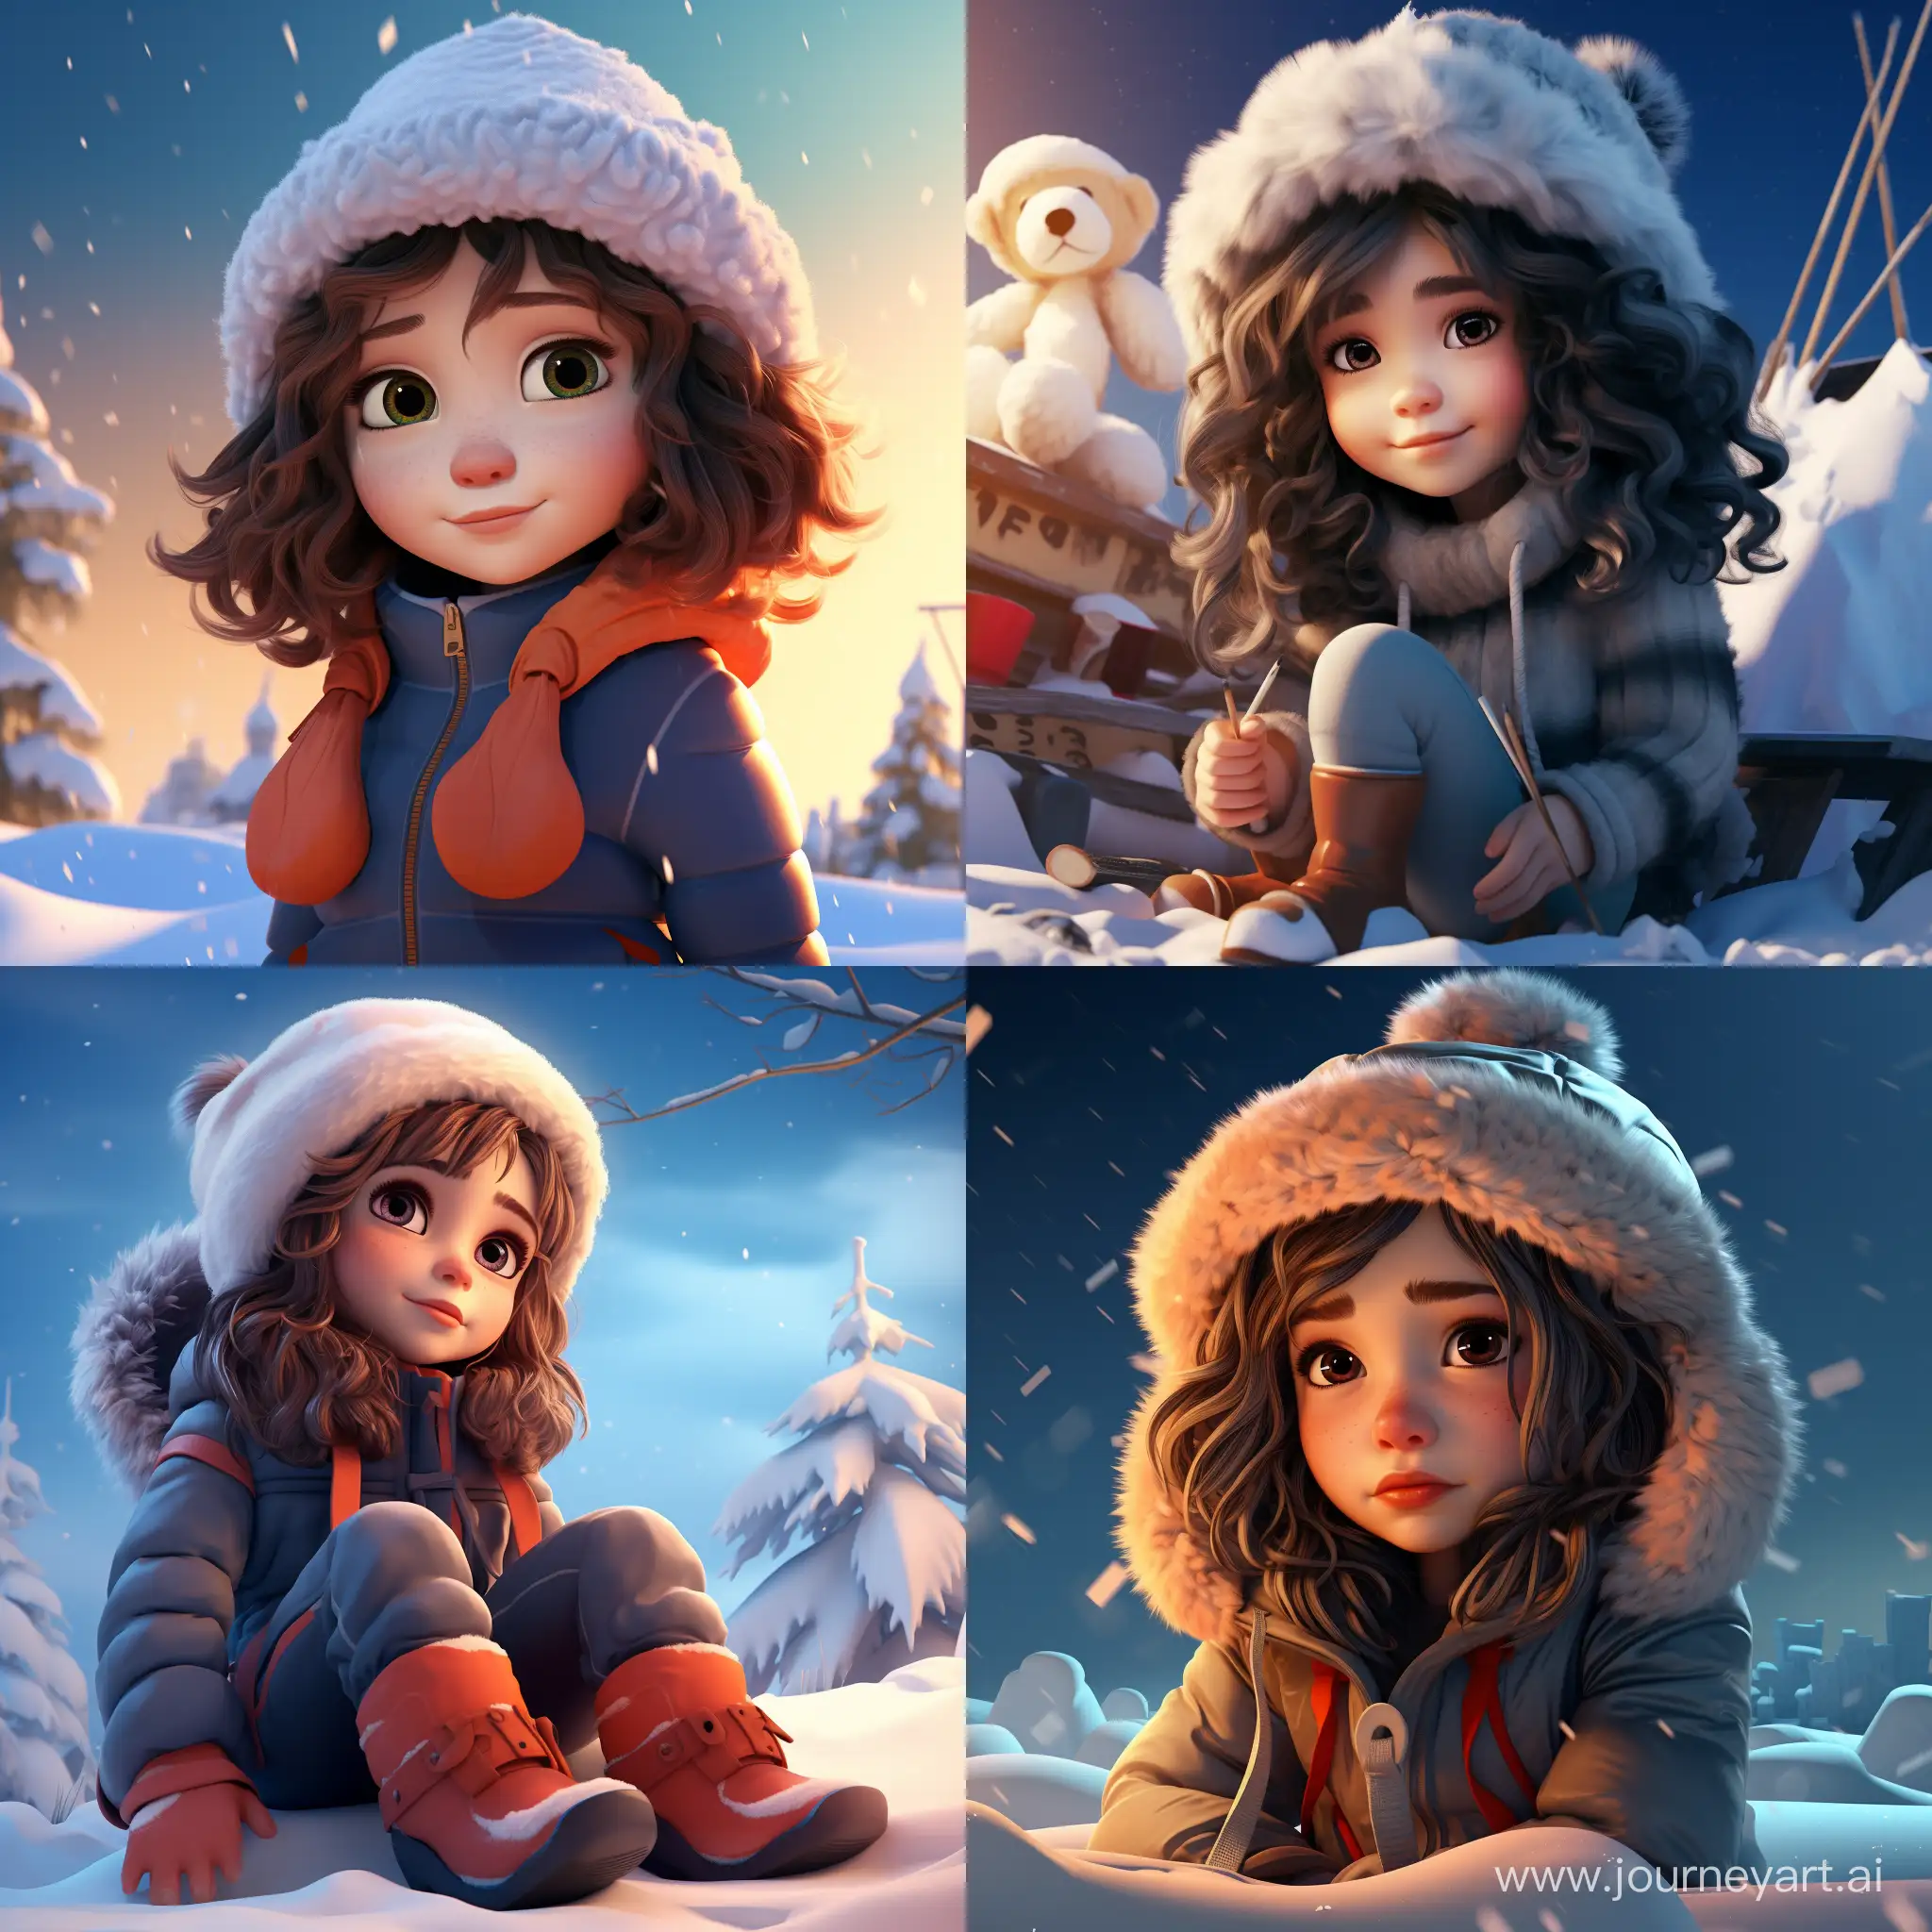 a cartoon of a little girl with big light eyes sitting in the snow hyperrealistic pop style, caricatural faces, uhd image, dima dmitriev, airbrush art